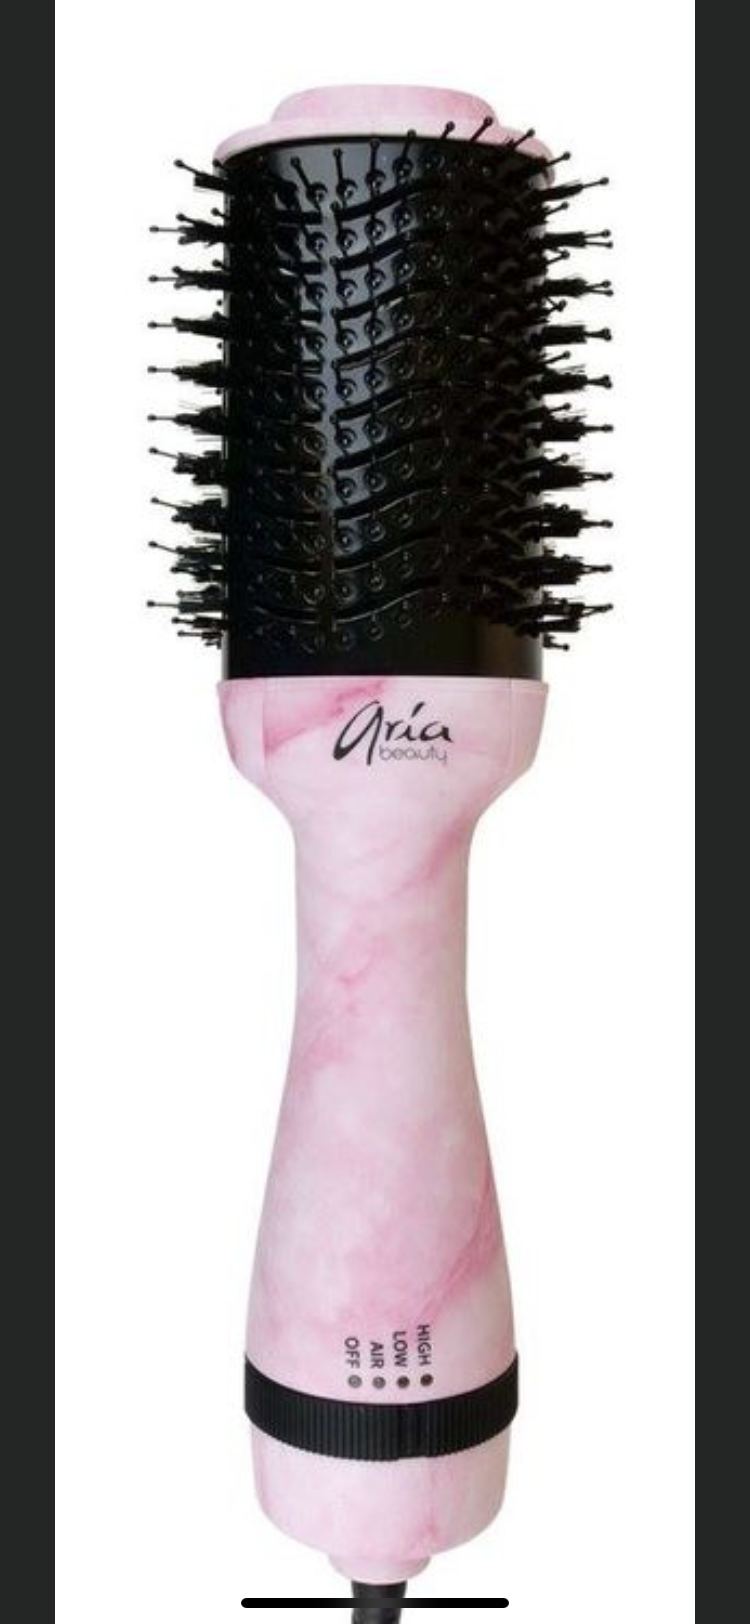 Aria Hair products. The Best Blow dry brush - Manzer Hair Studio